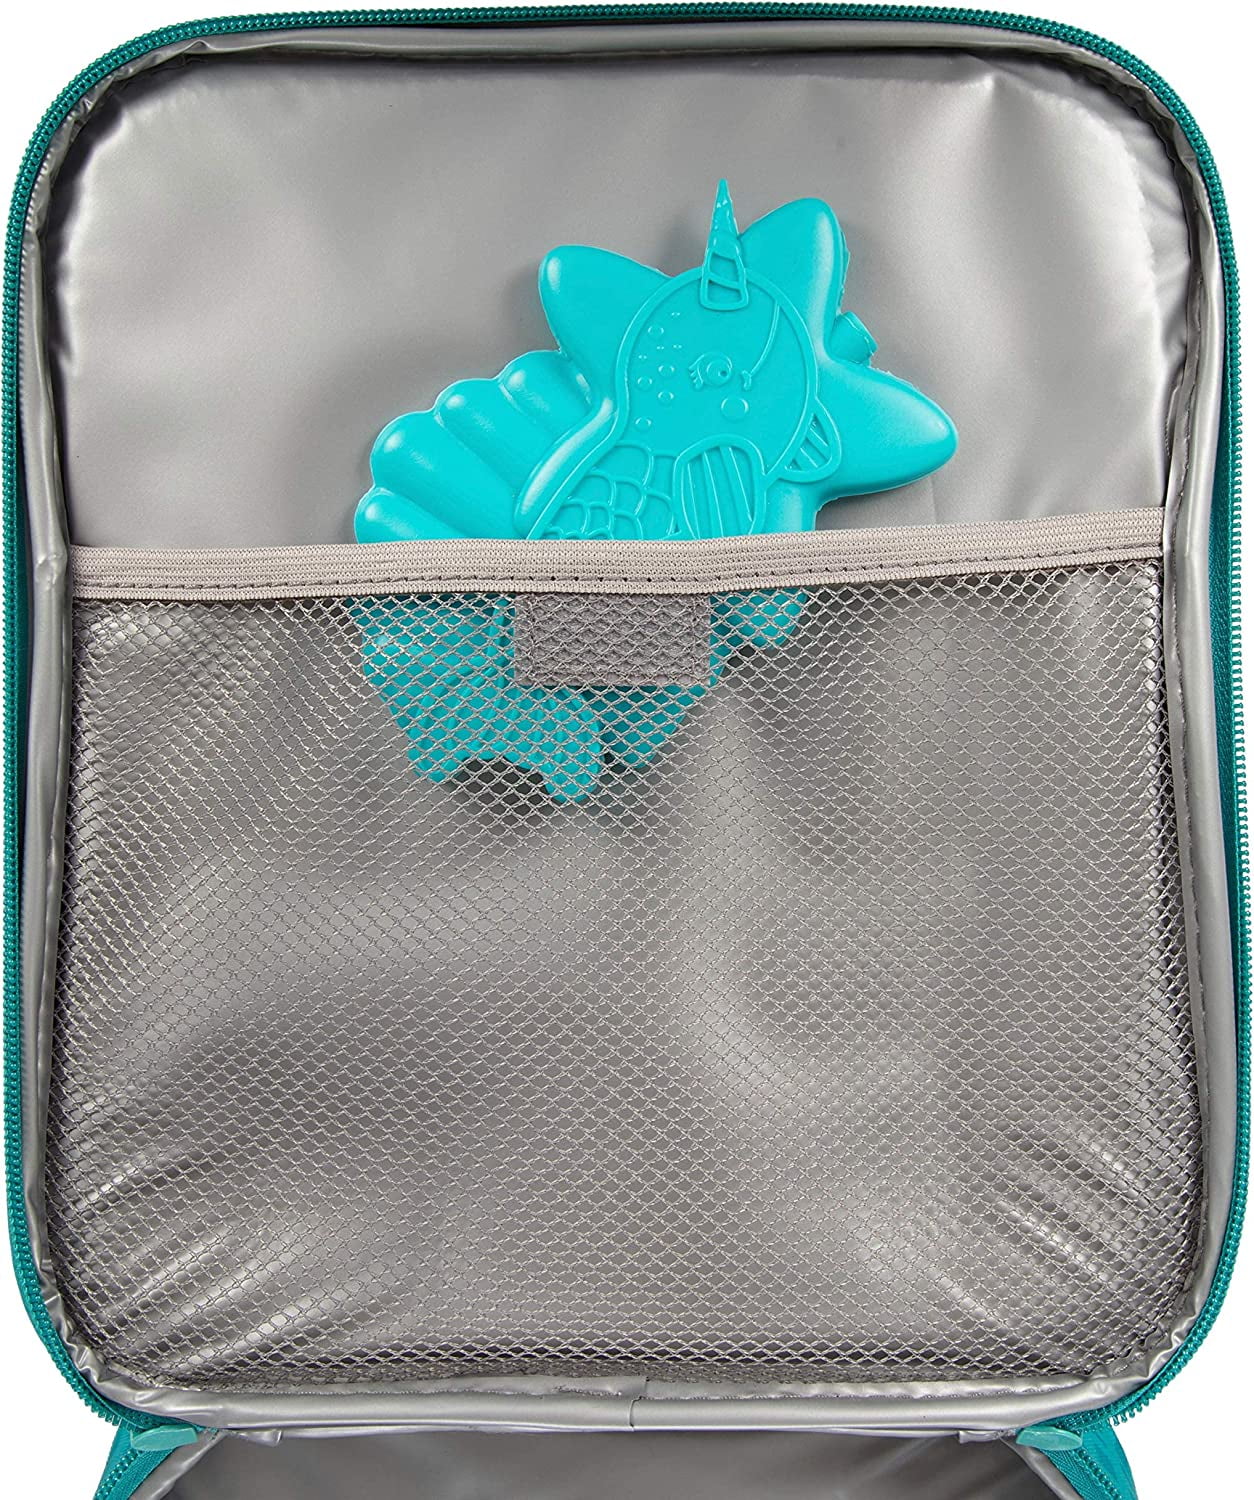 Lunch Box for Back to School, Fun Narwhal Print with 2 Containers and  Reusable Ice Pack, Insulated and Durable Lunch Bag fits Most Bento Boxes